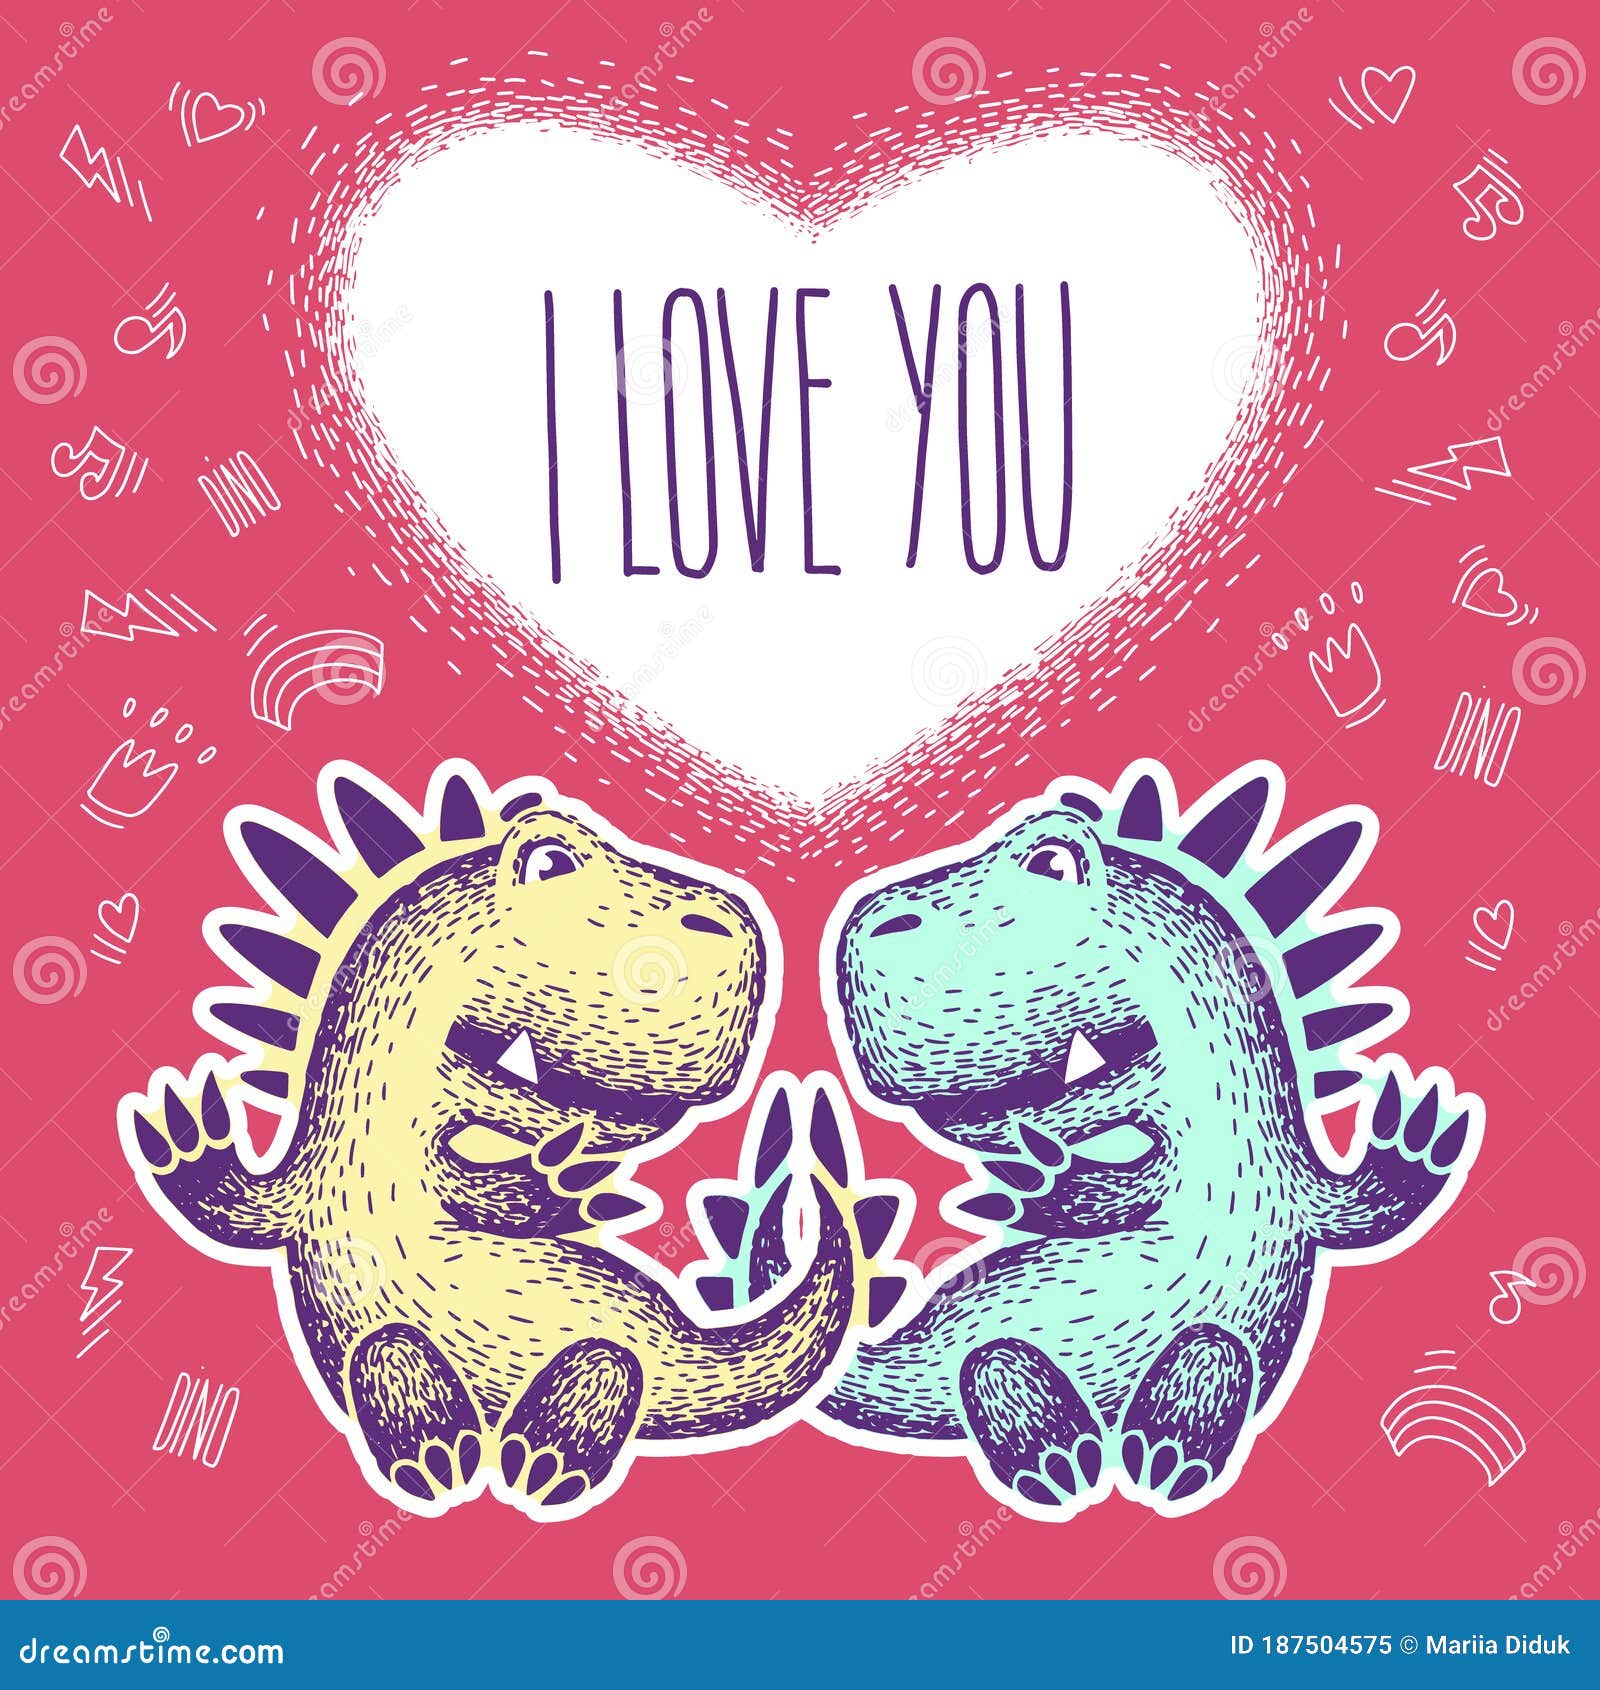 https://thumbs.dreamstime.com/z/declaration-love-dino-i-love-you-two-cute-lovers-cartoon-dinosaurs-vector-design-fabric-print-textile-wrapping-paper-dino-i-187504575.jpg